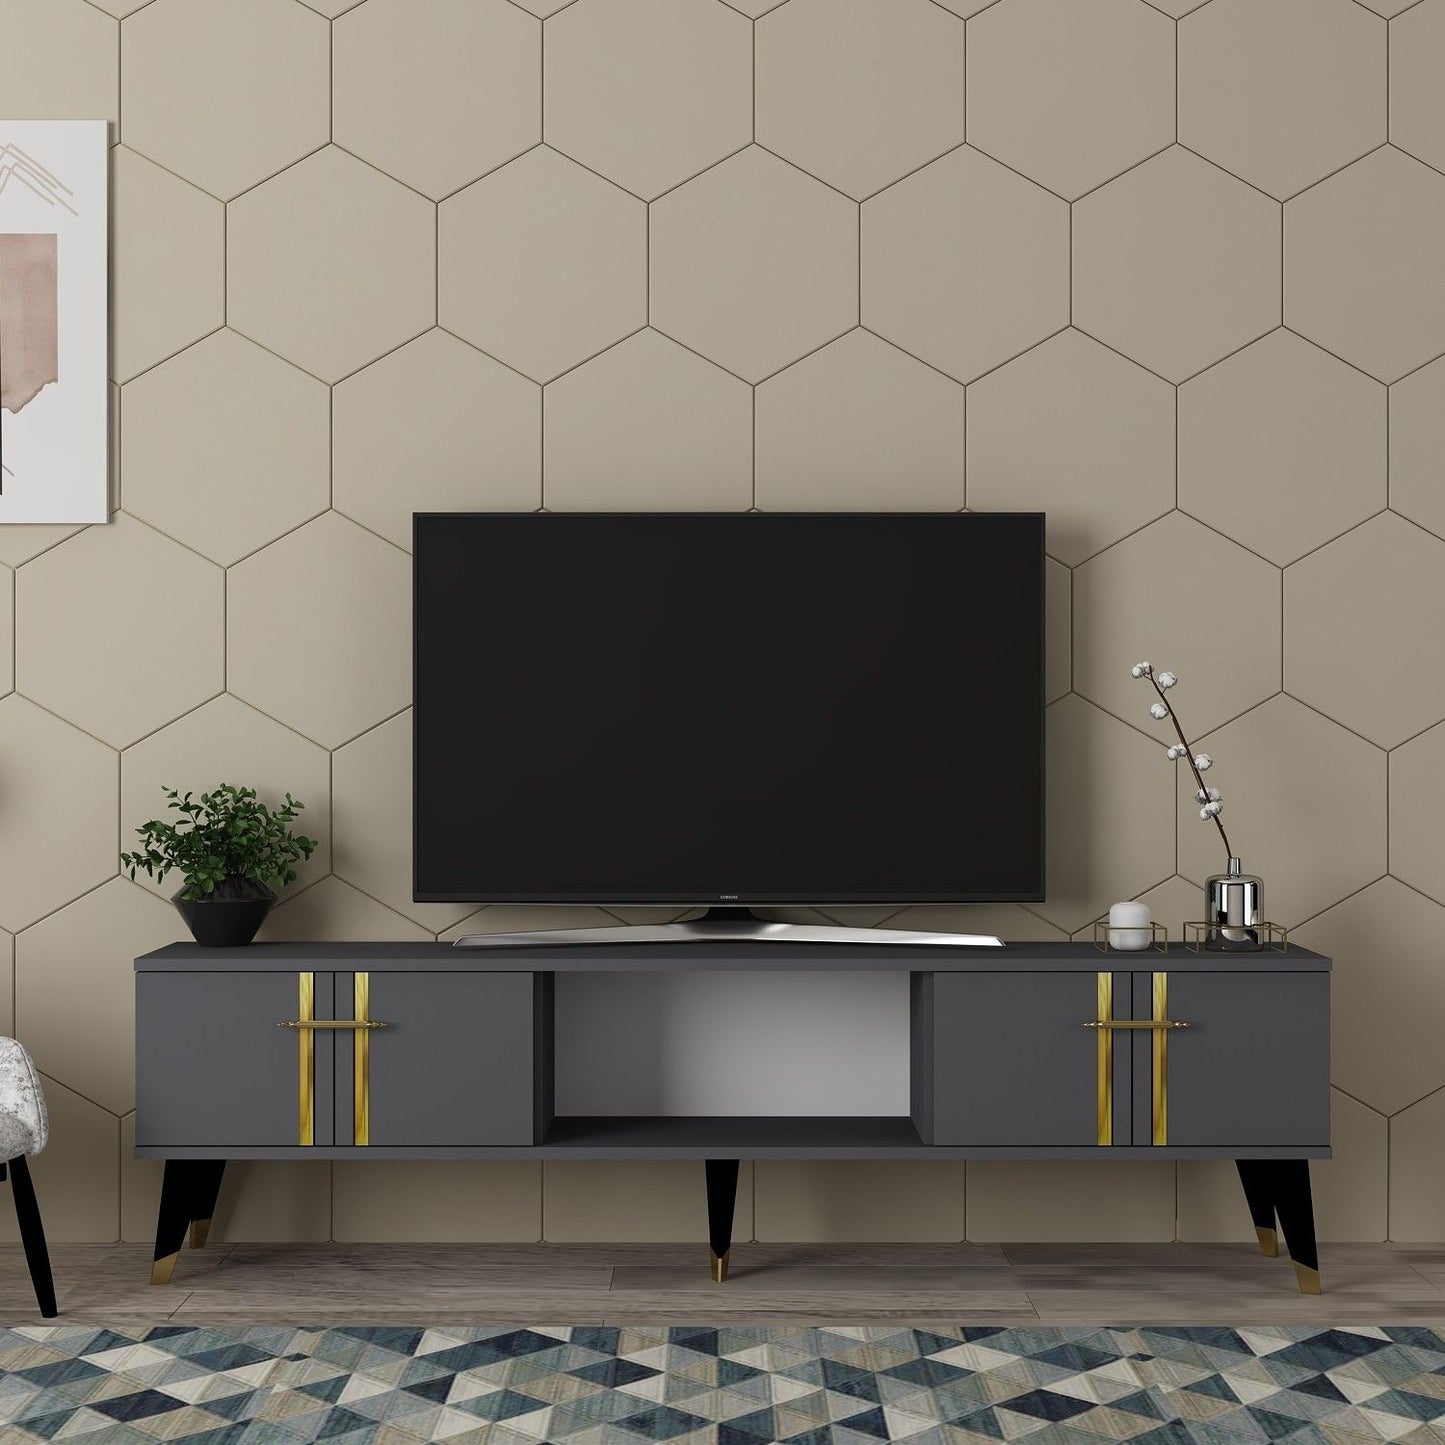 Asel - Anthracite, Gold - TV Stand